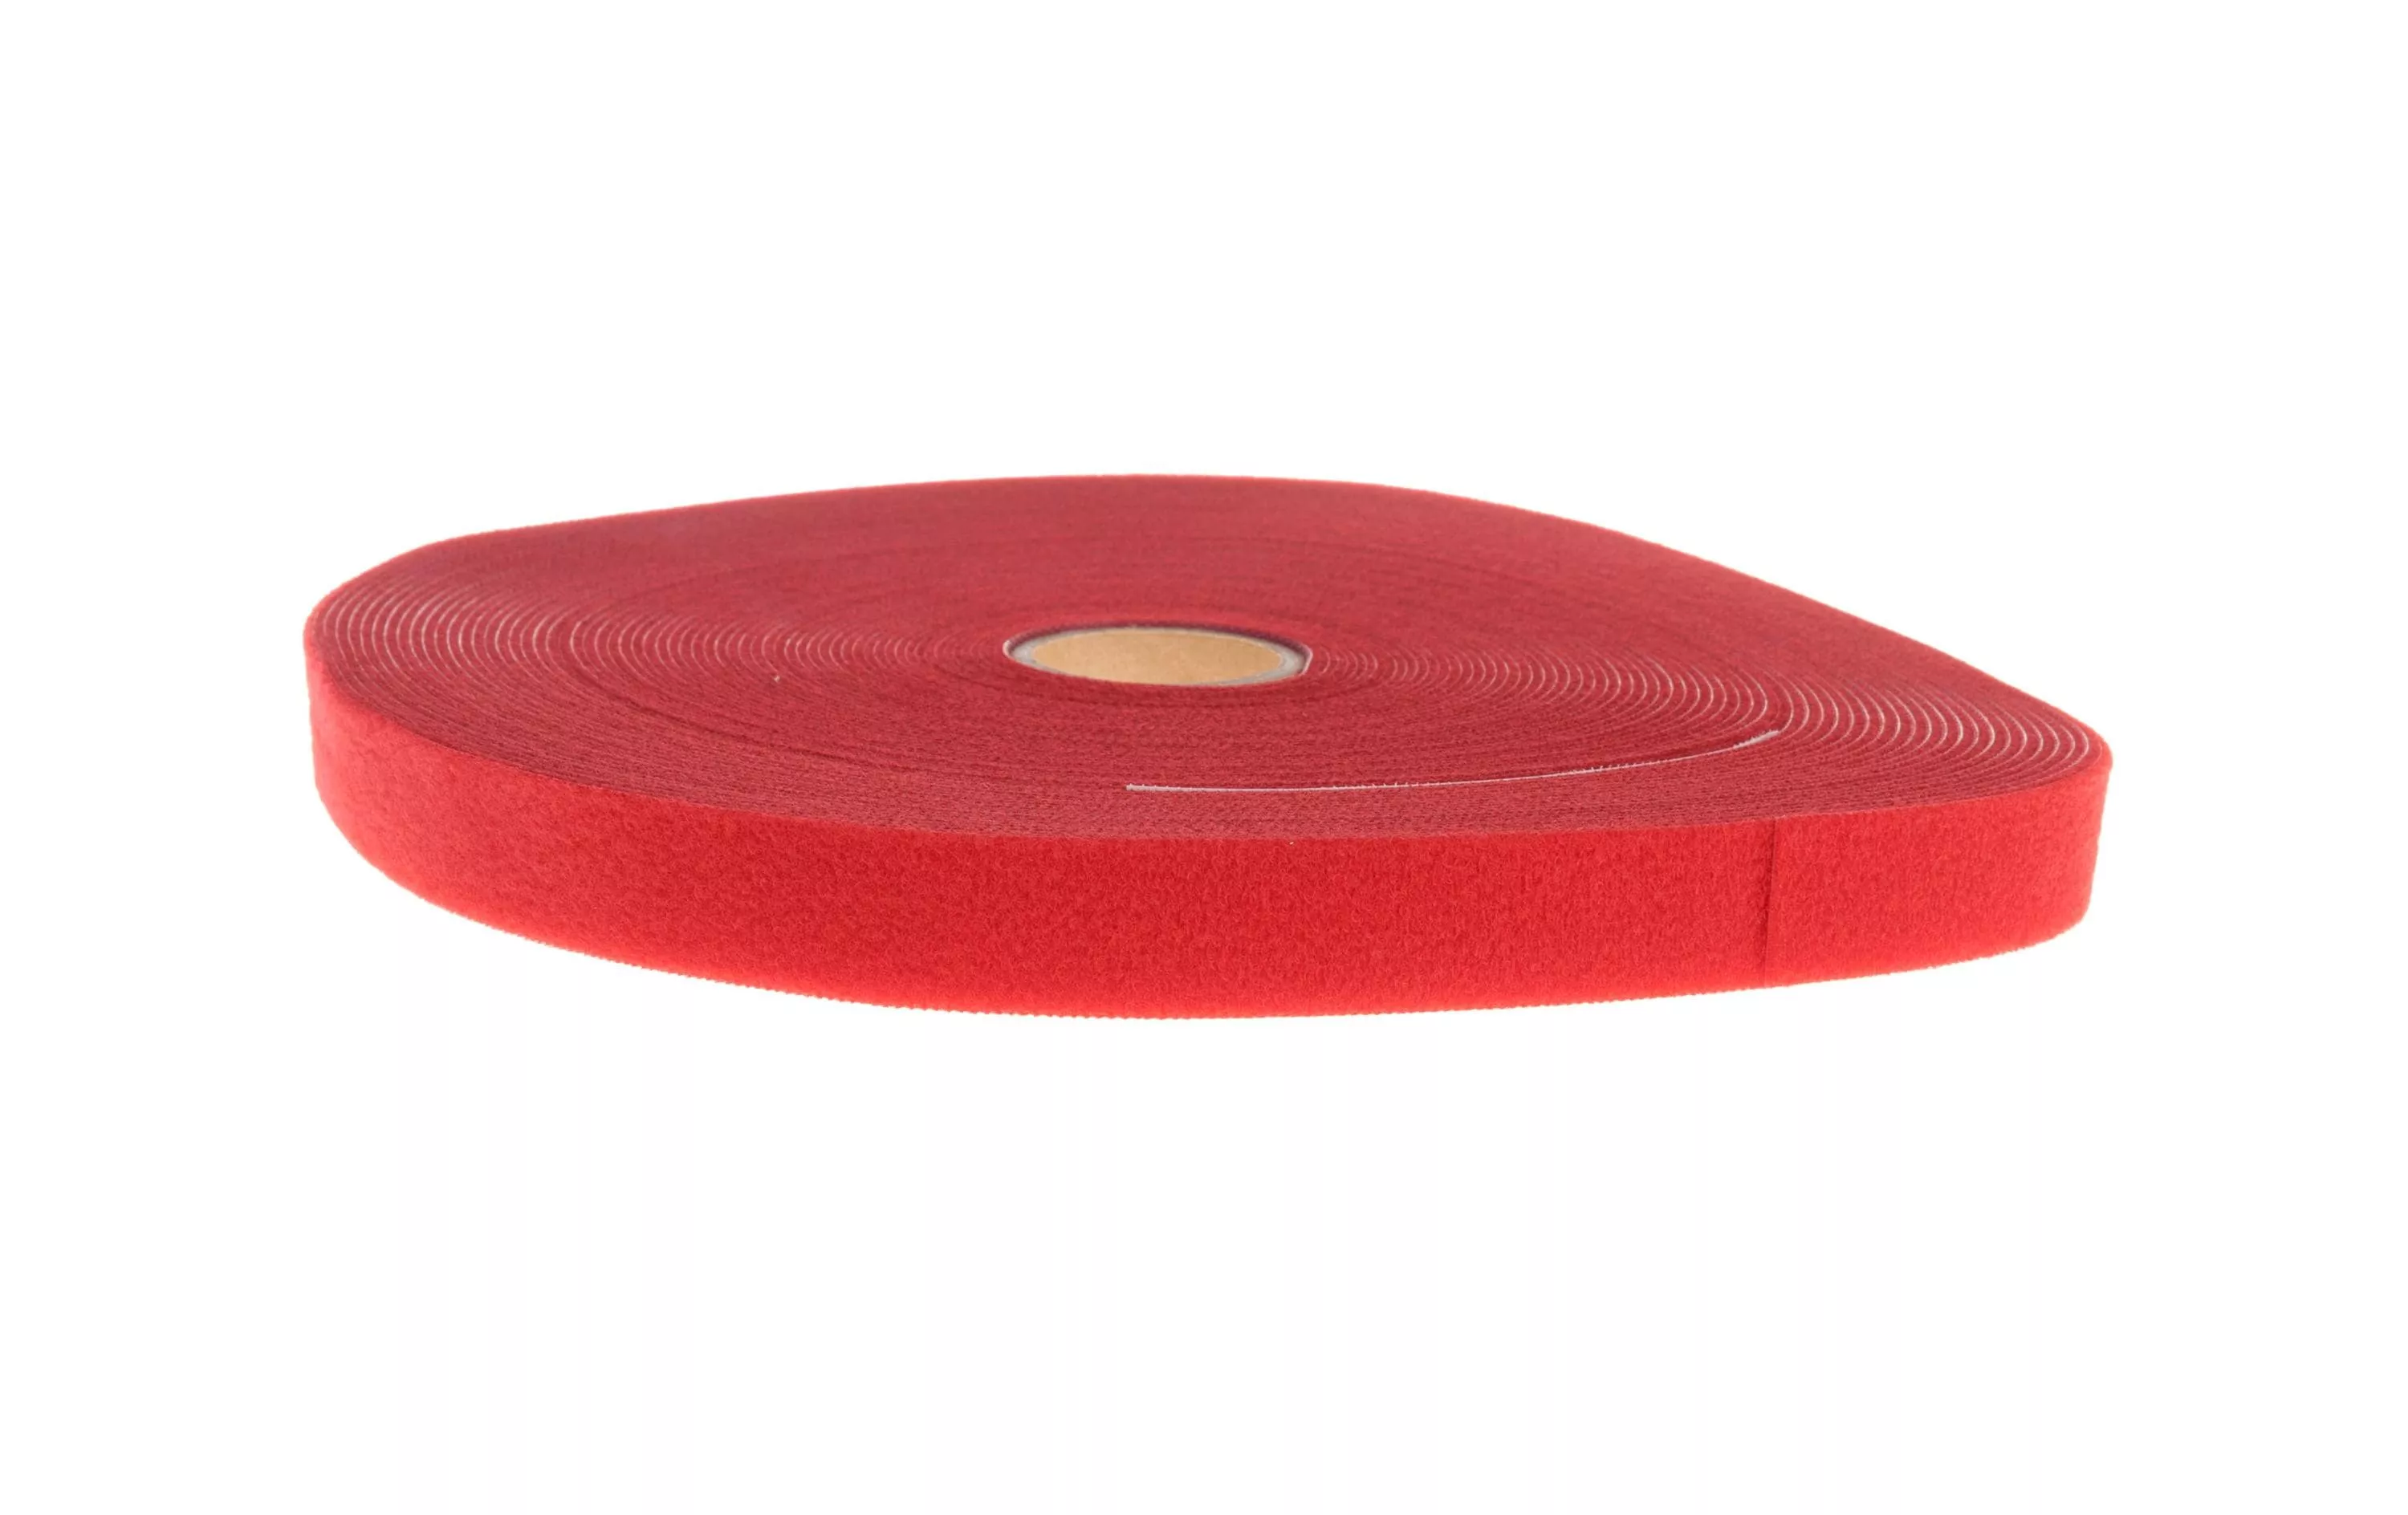 Klettband-Rolle ETN Fast Strap 20 mm x 25 m, Rot